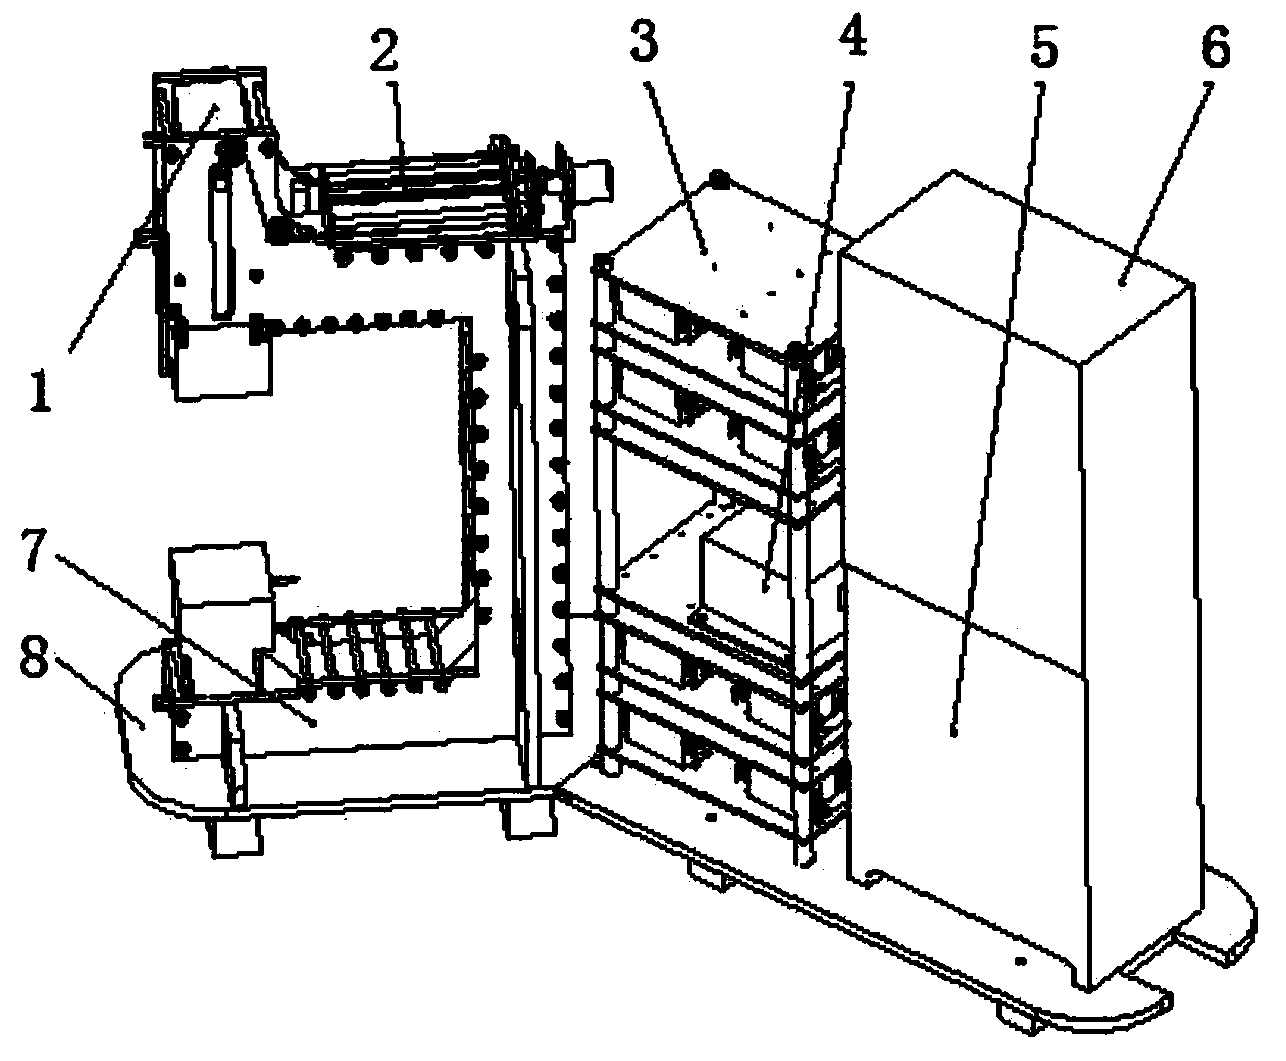 Magnetic induction therapy apparatus